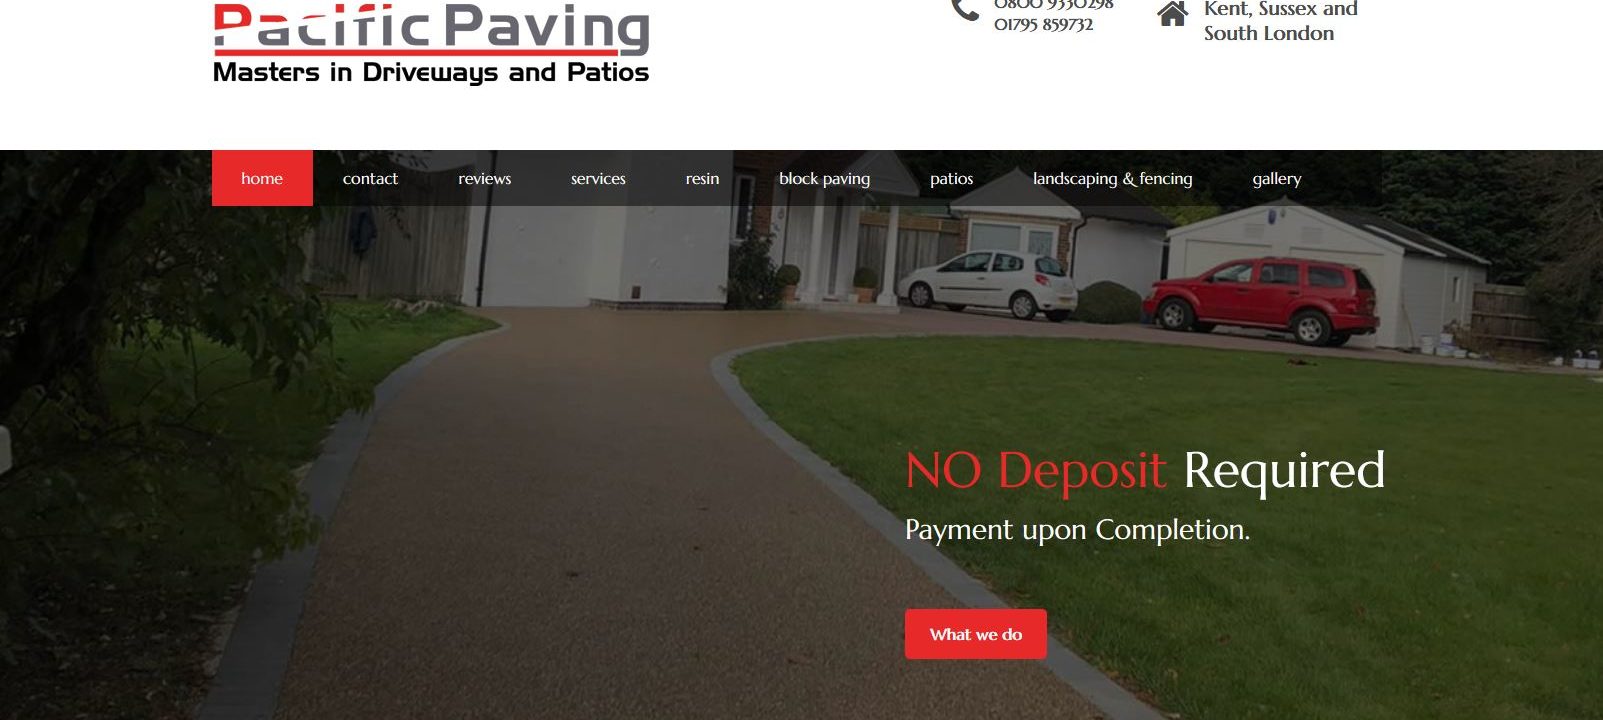 pacific paving home page